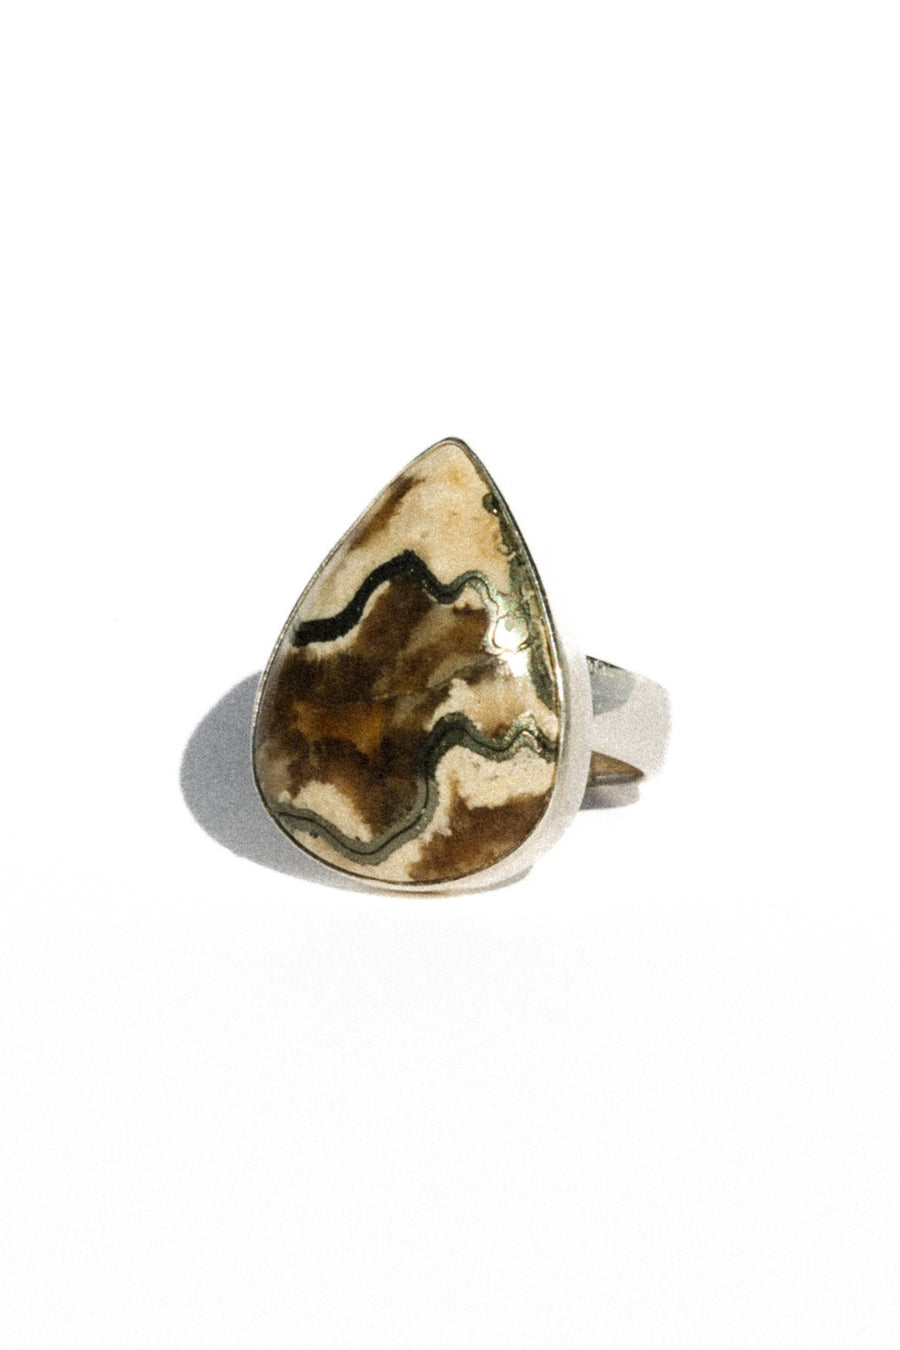 Starborn Creations Jewelry US 7 / Open Size / Silver Nile River Stone Ring